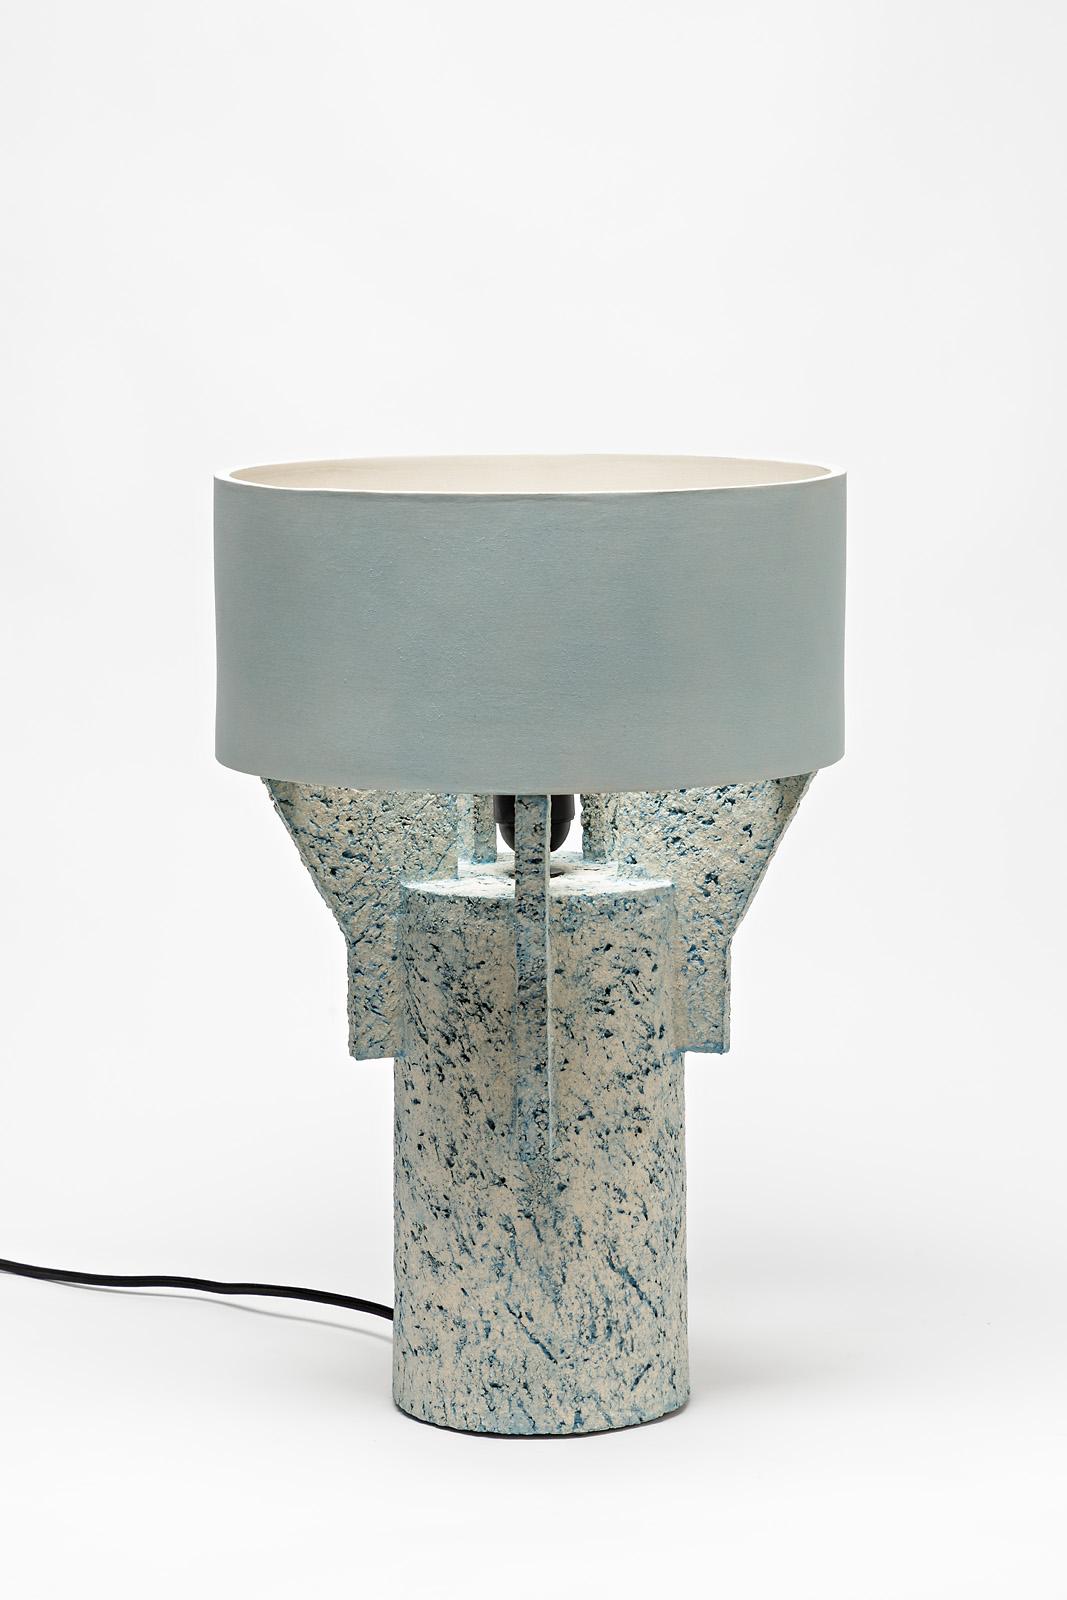 A ceramic table lamp by Denis Castaing with blue glaze decoration.
The base and the lamp shade are in ceramic.
Sold with an European electrical system.
Perfect original conditions.
2019.
Signed under the base.